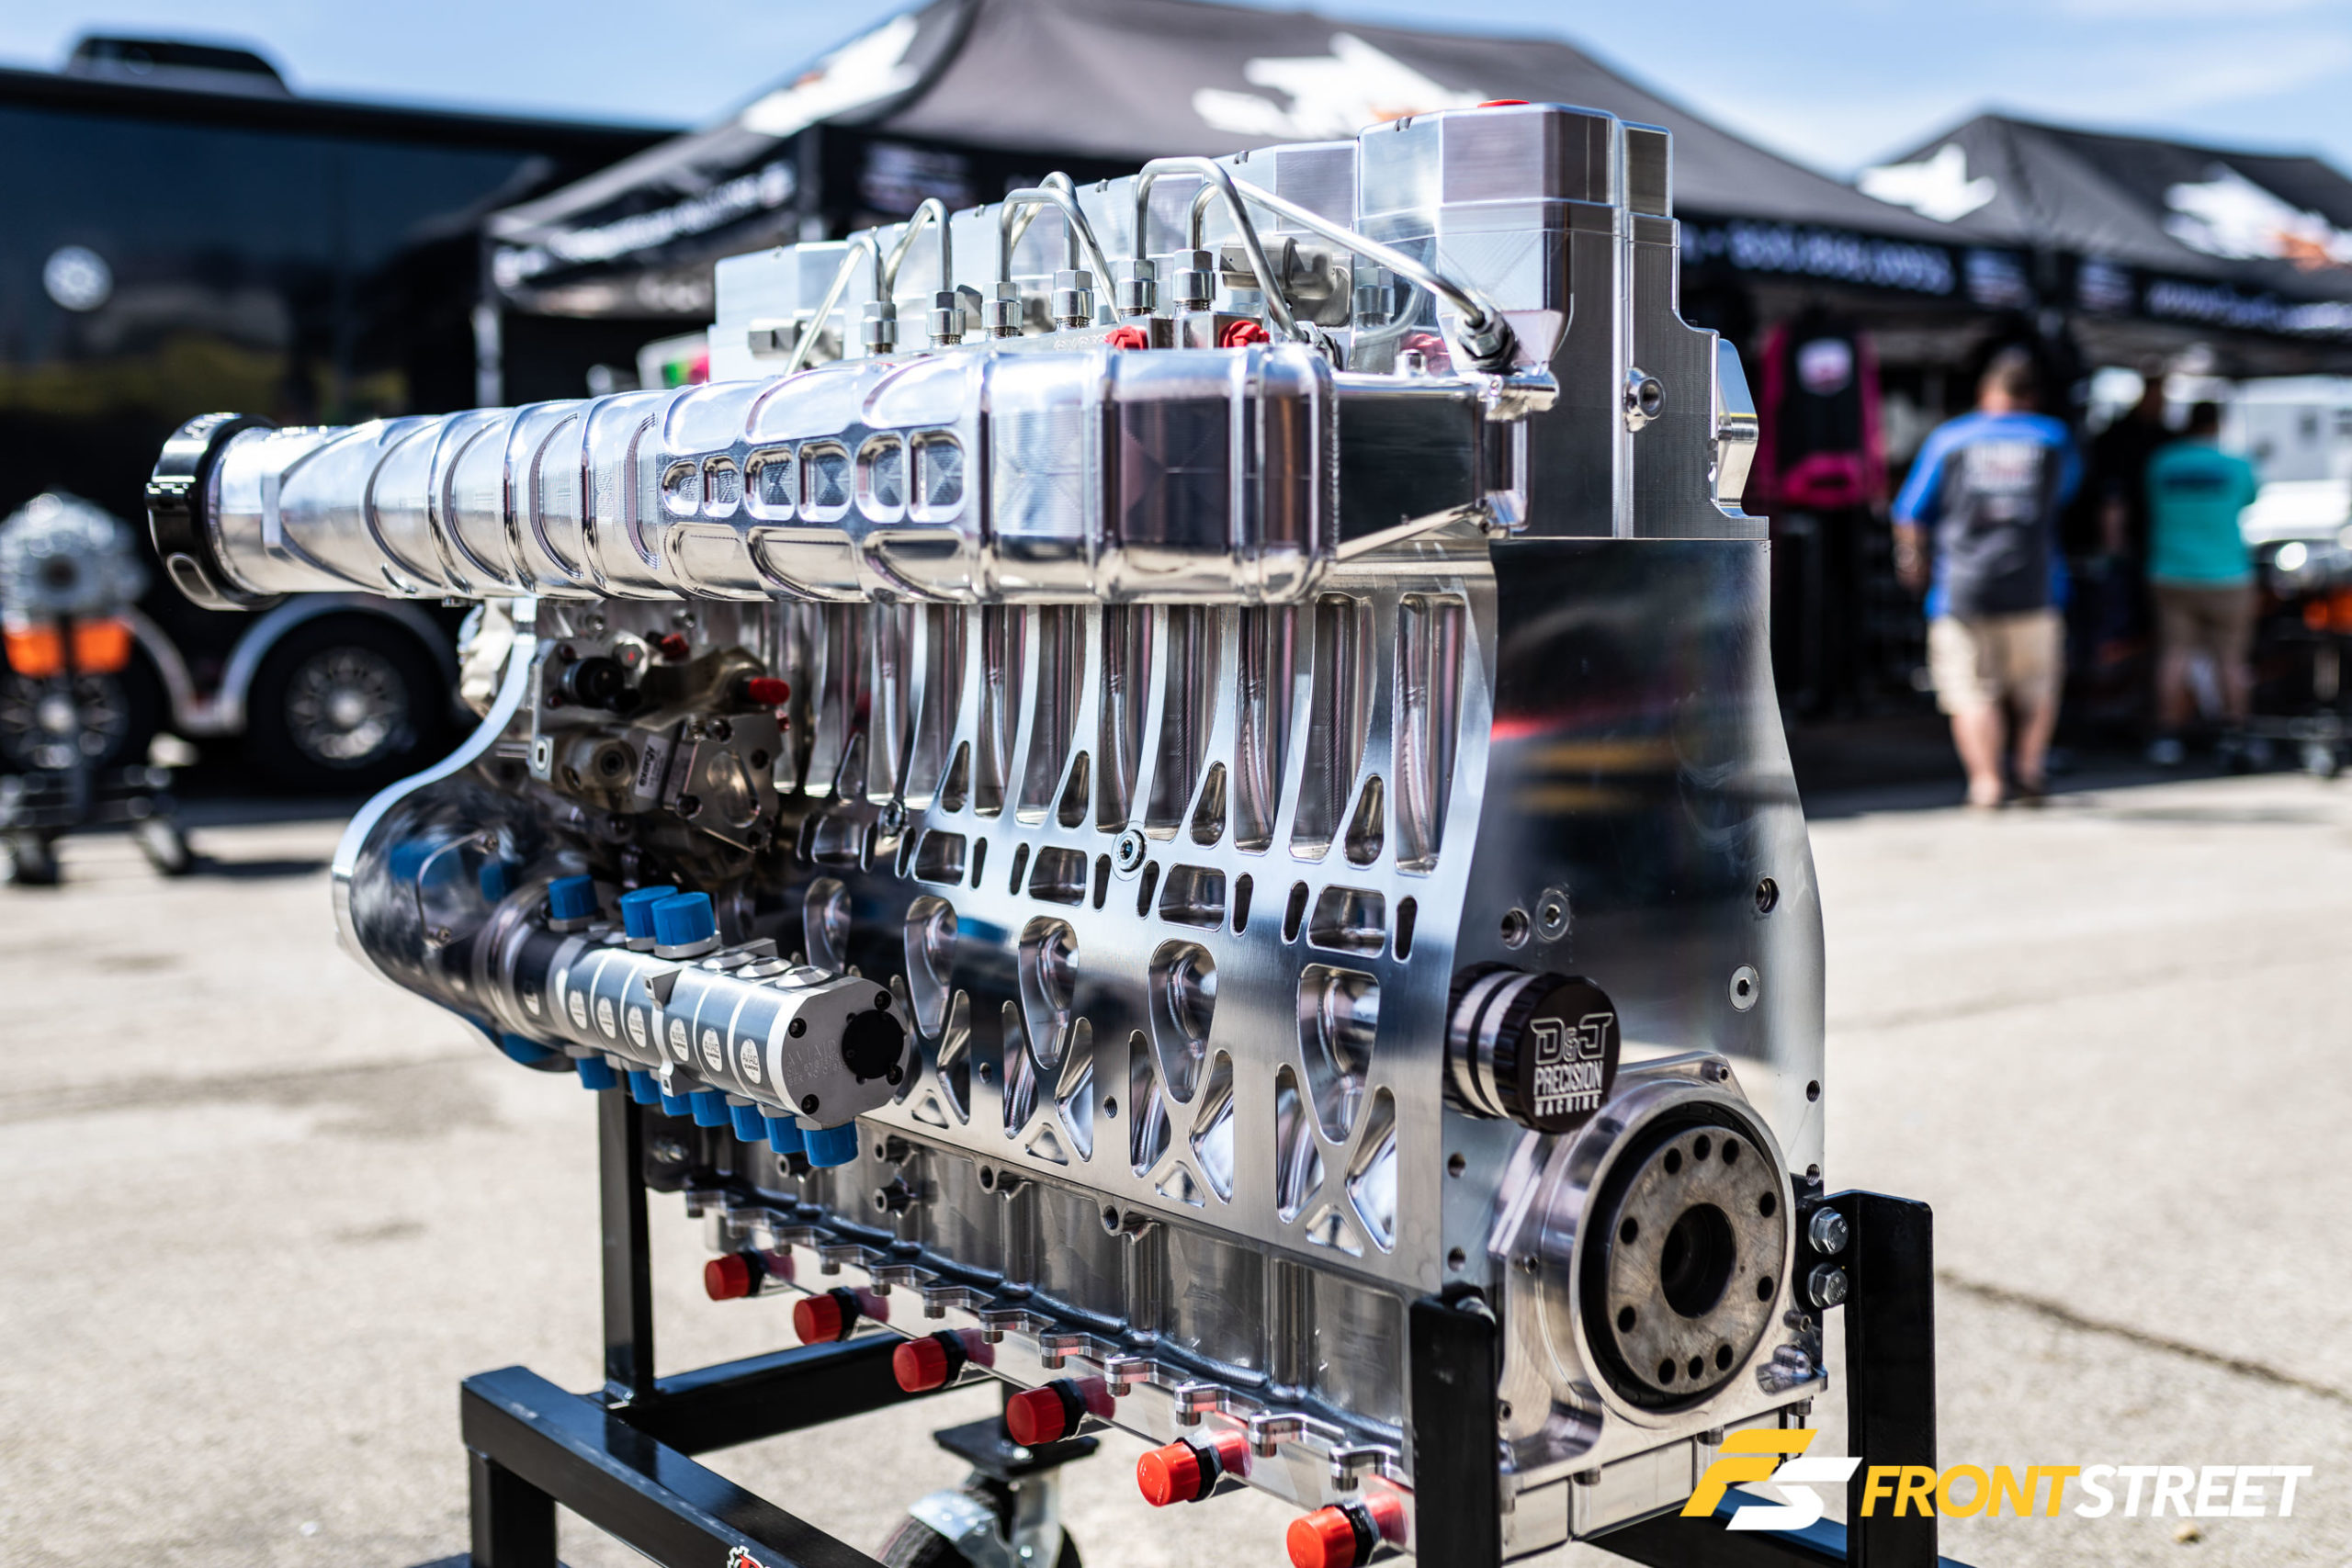 The Secrets Of The 3,200 Horsepower Executioner Diesel Engine